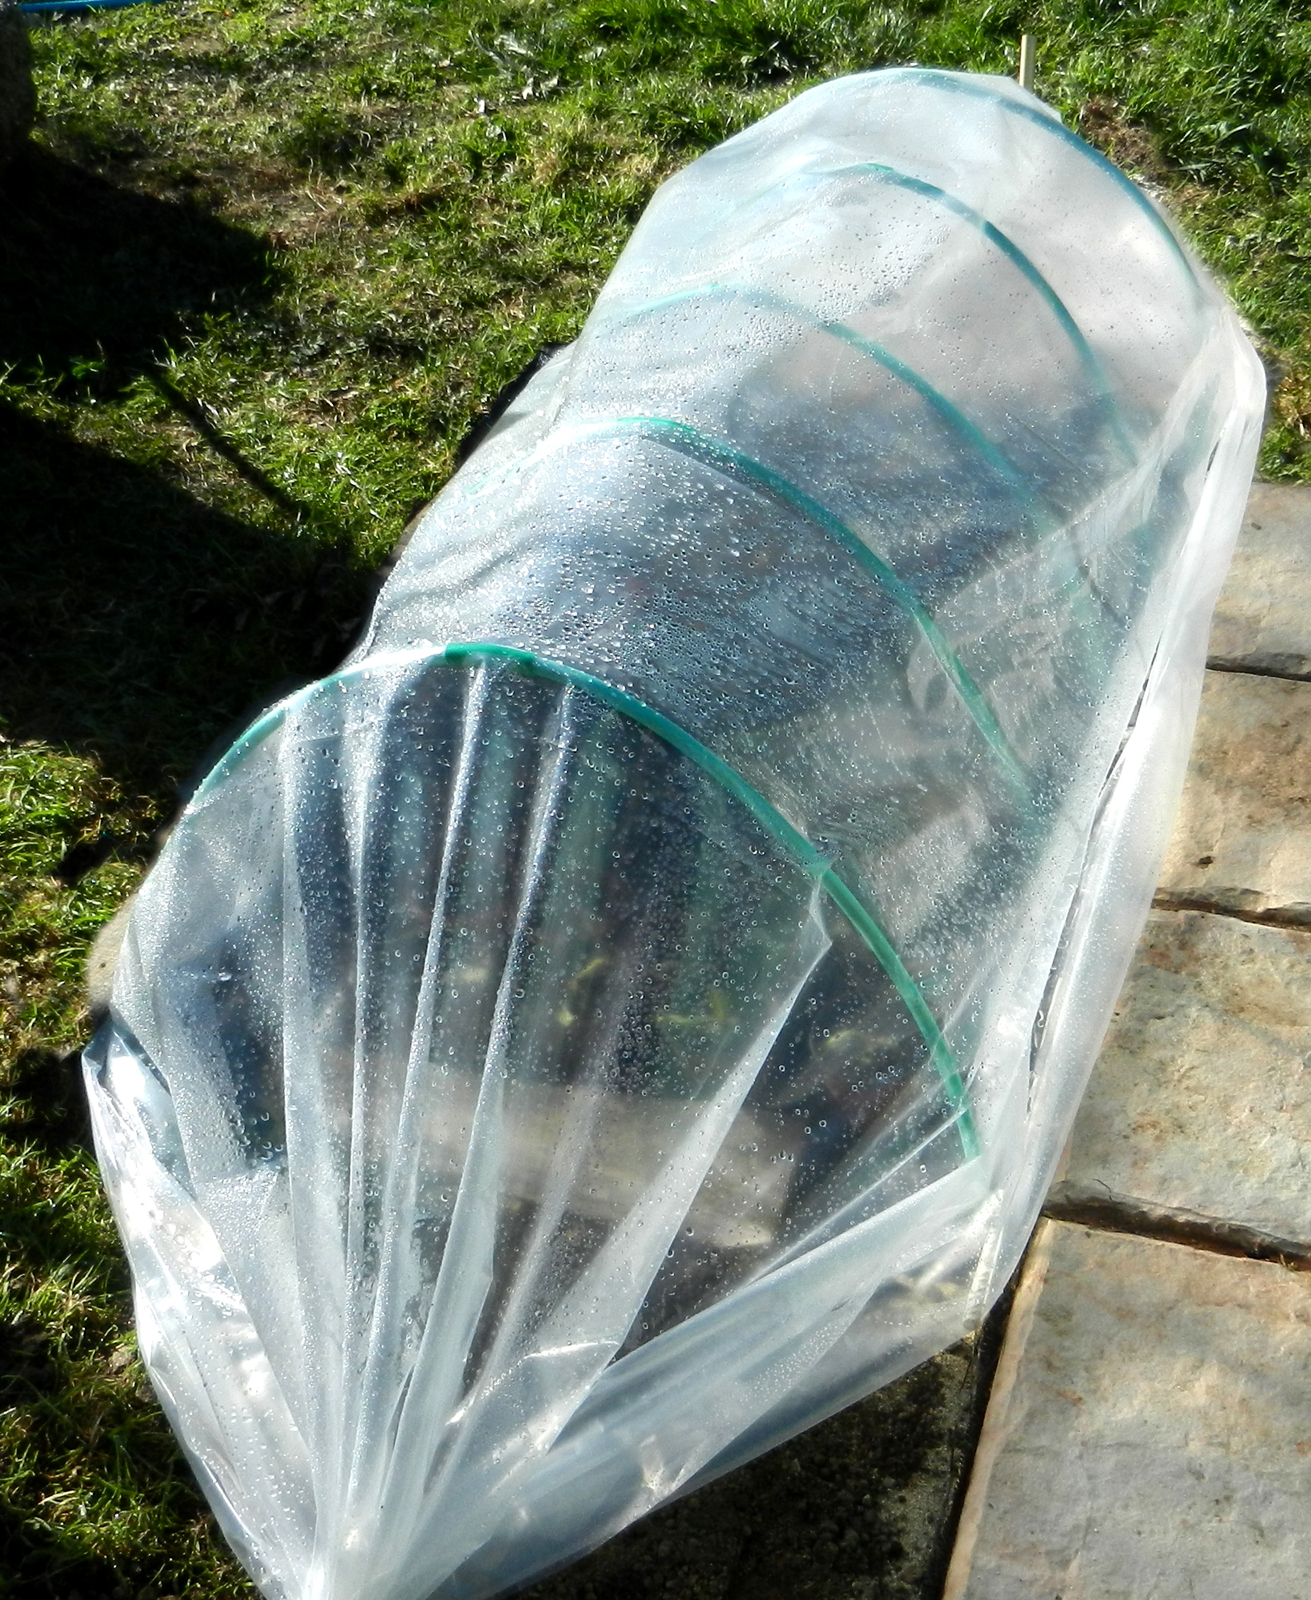 Extending Your Summer Garden image garden bed with a plastic row cover